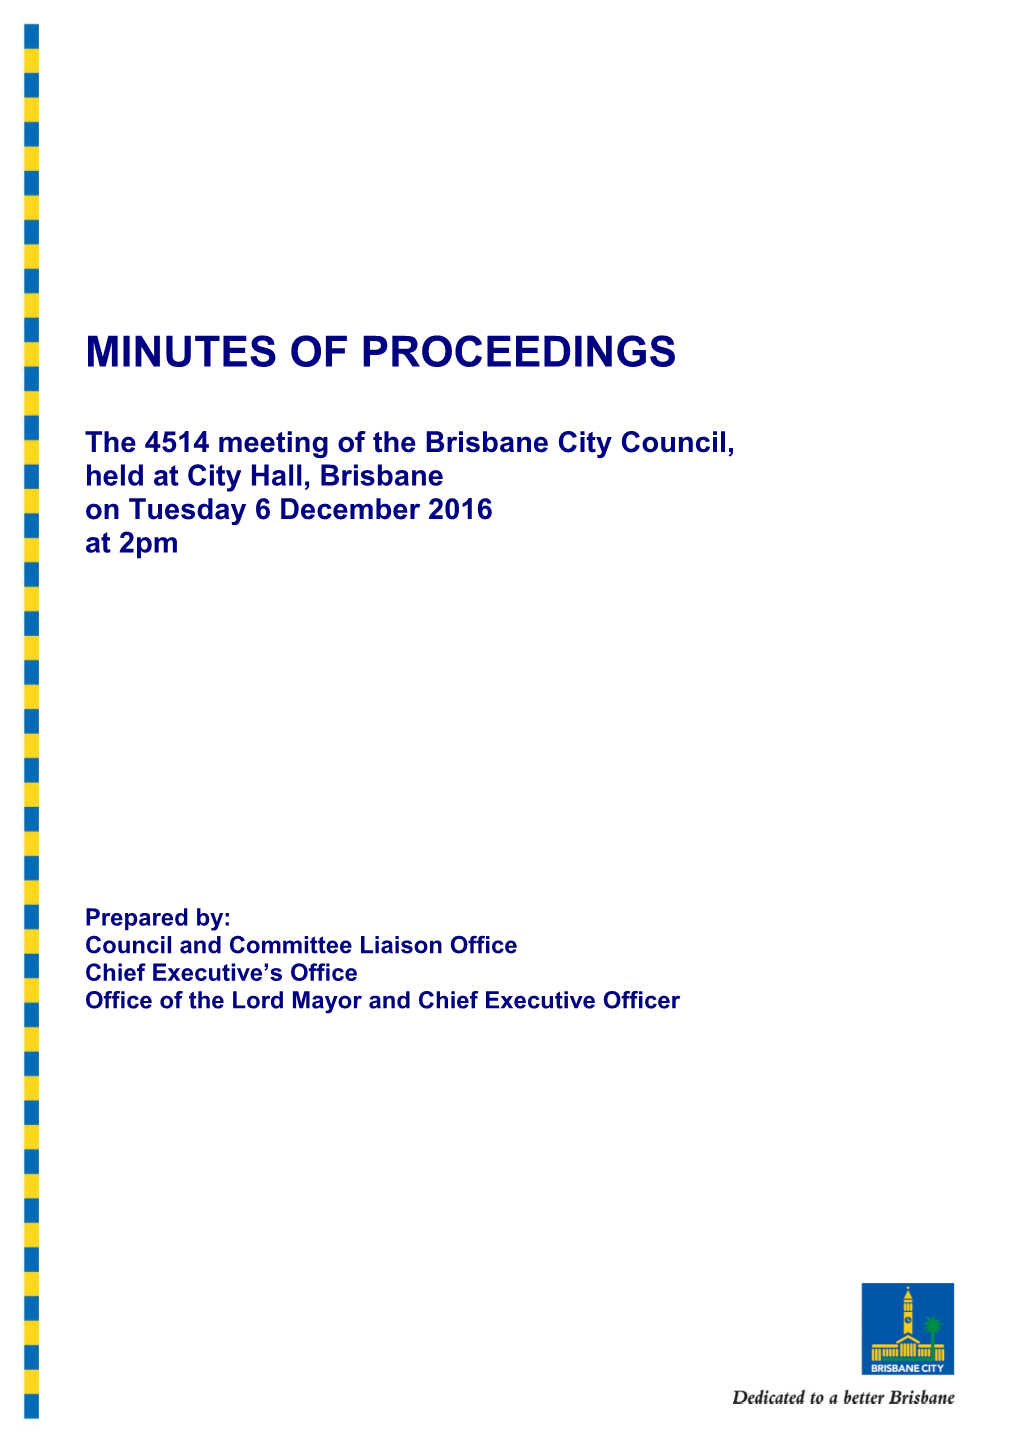 The 4514 Meeting of the Brisbane City Council